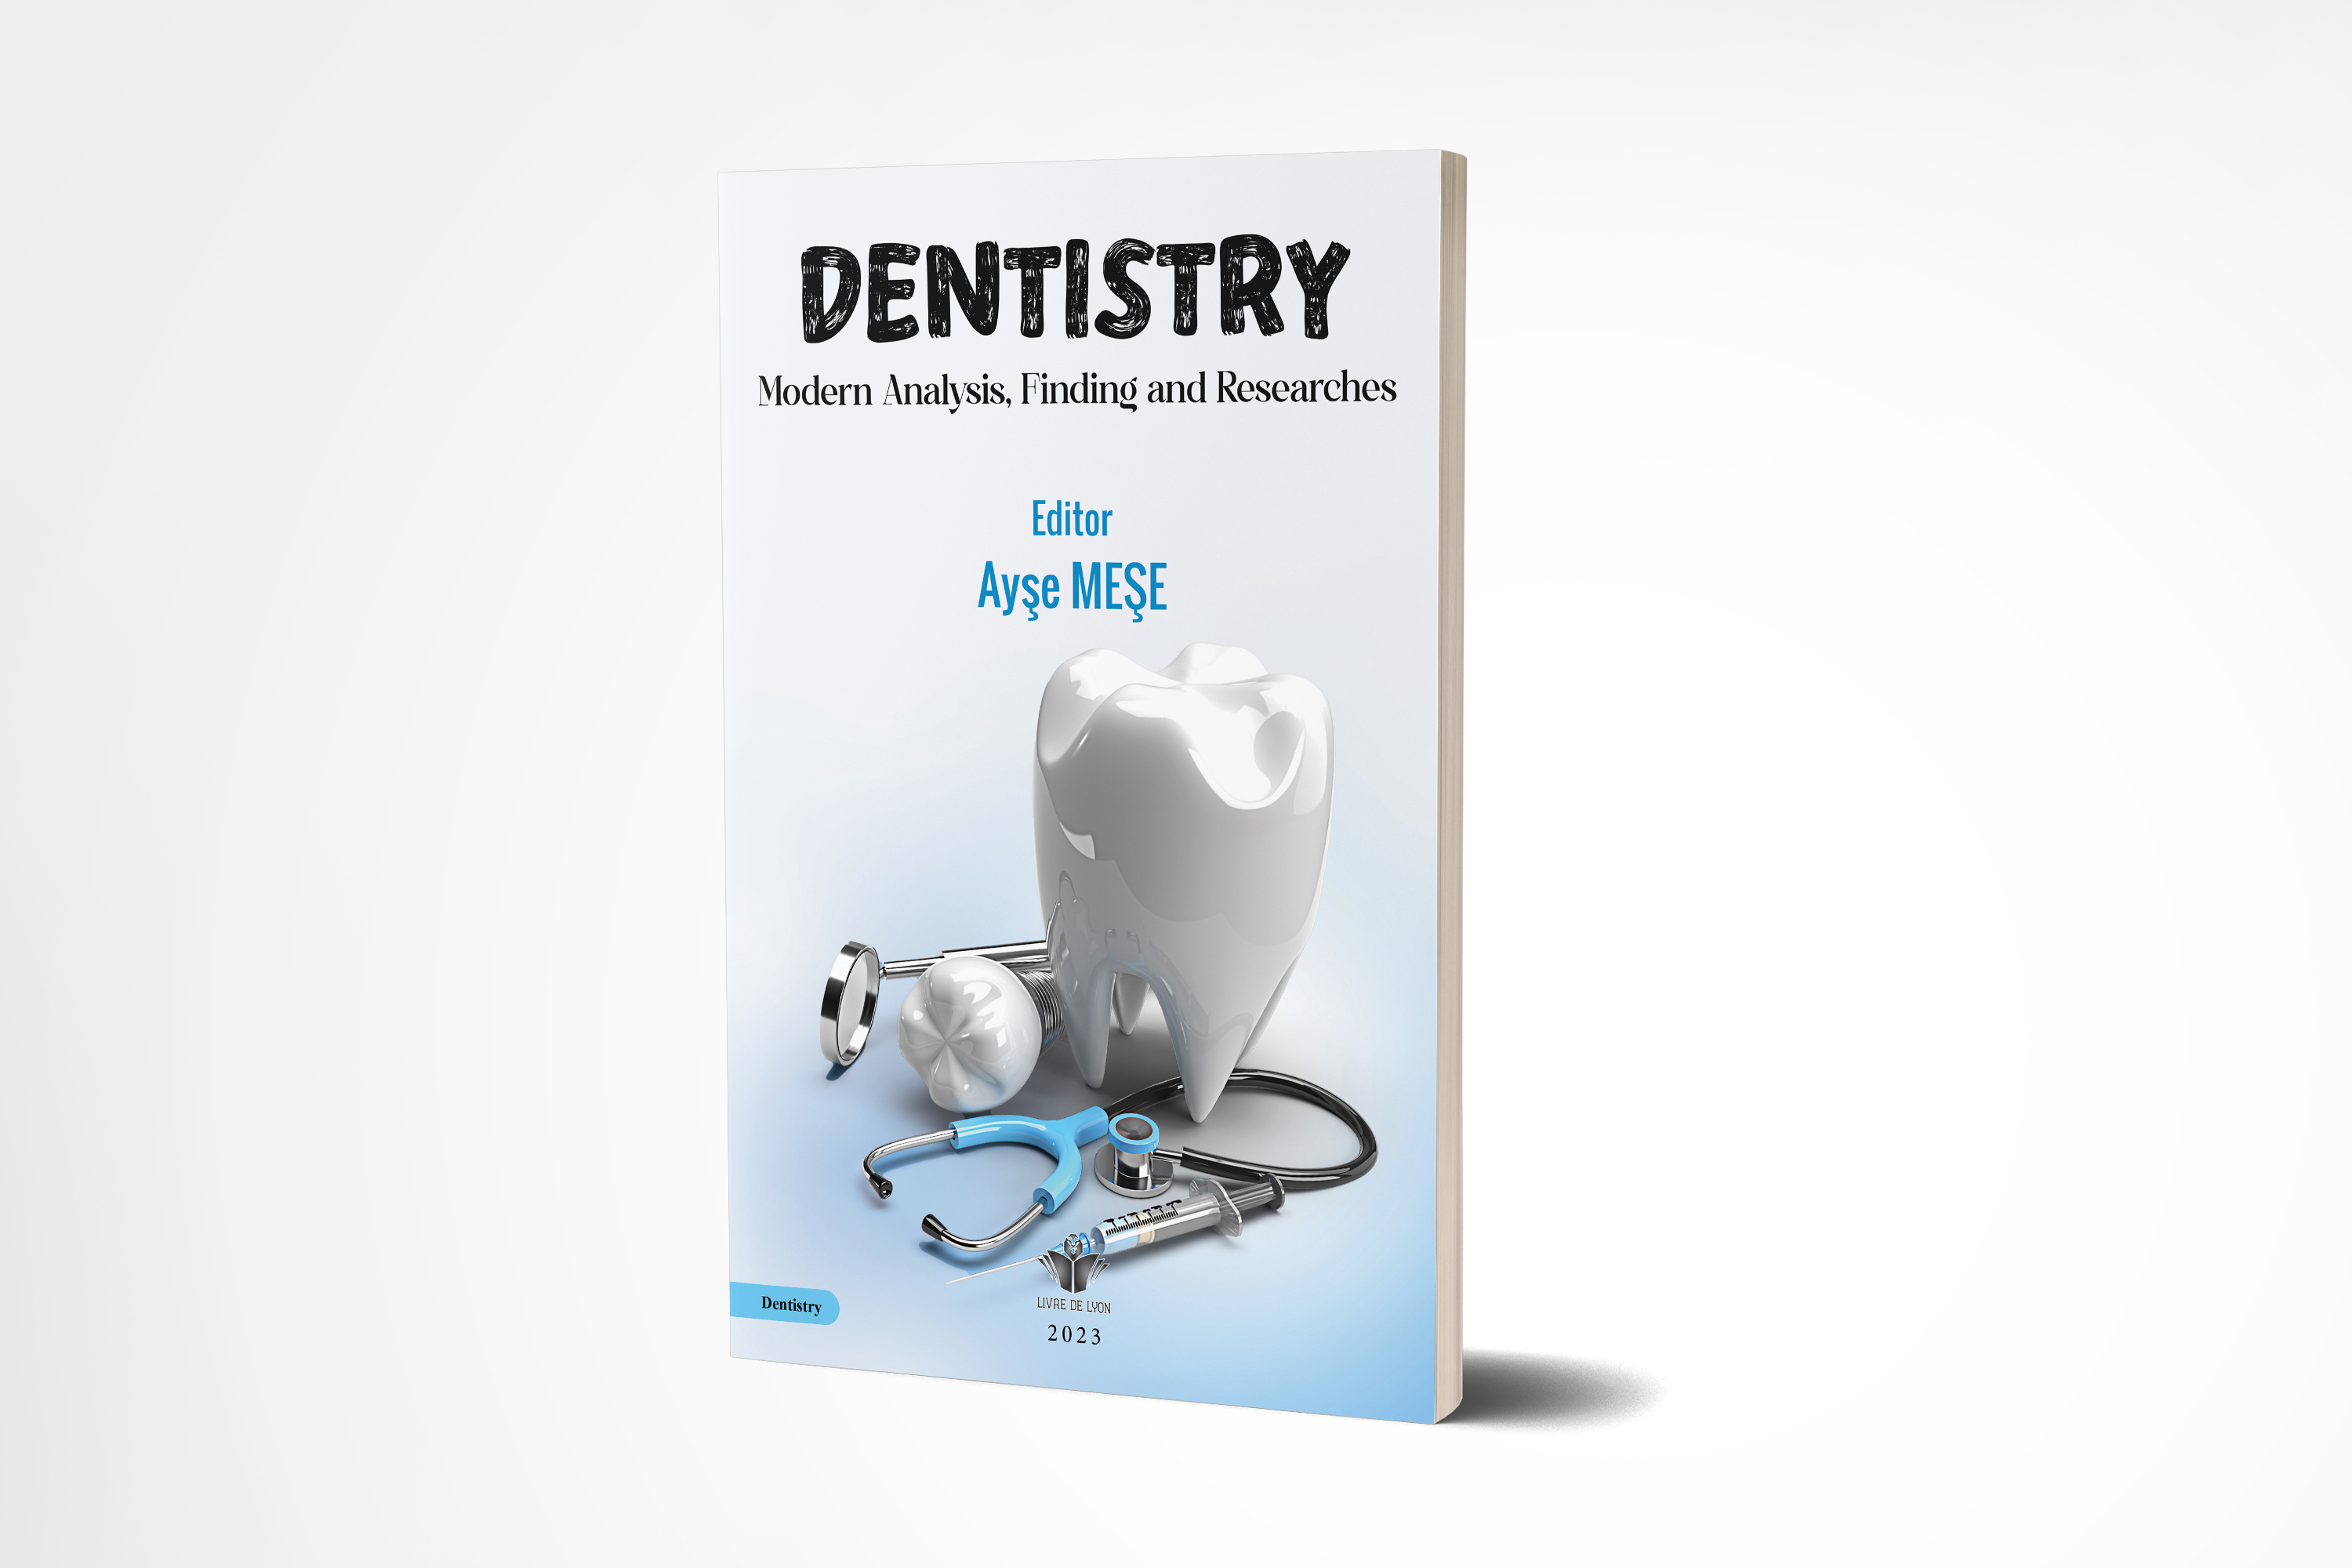 Dentistry Modern Analysis, Finding and Researches